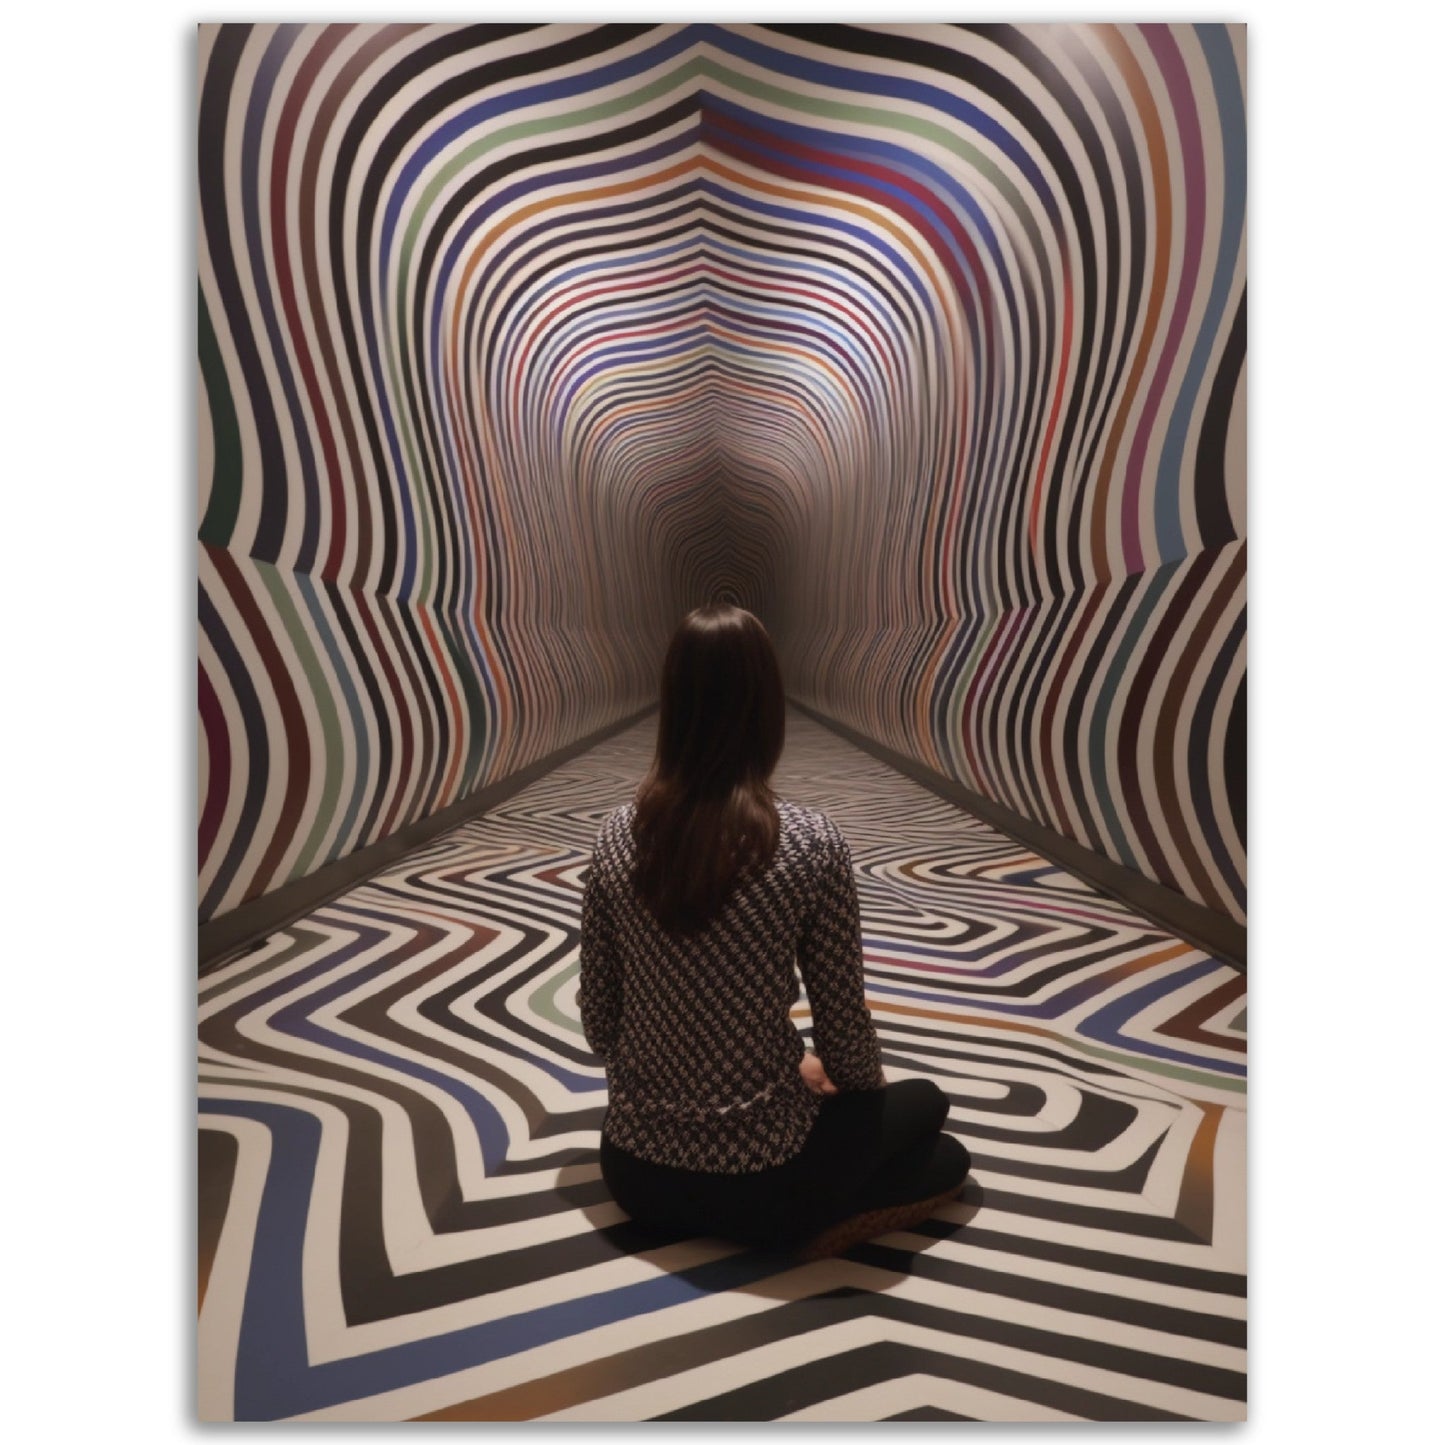 A woman sitting on the floor in front of The Hypnotic Labyrinth, surrounded by high quality posters and colored wall art.